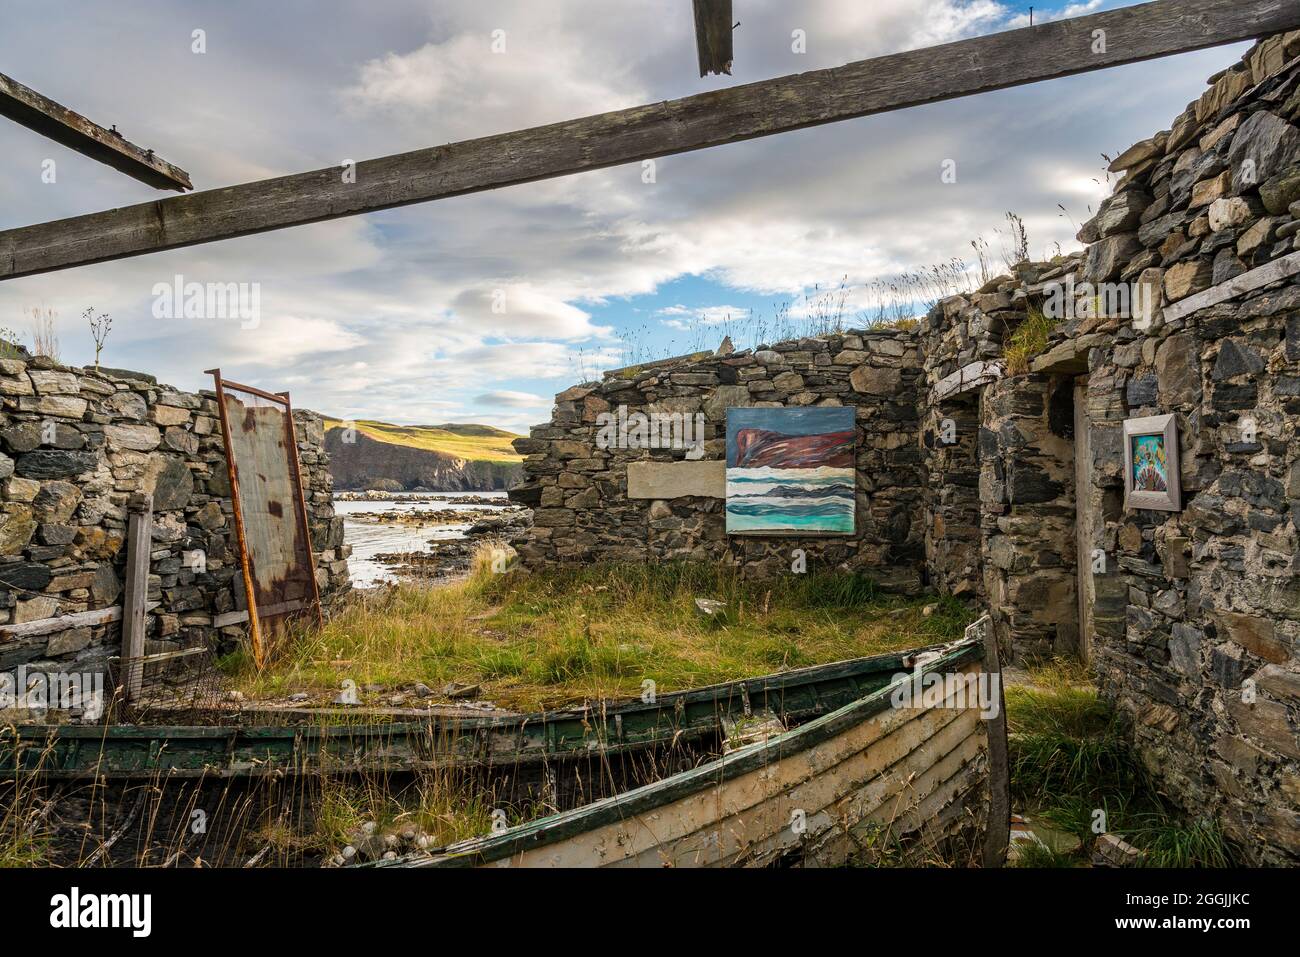 An old ruined and roofless building with old boats makes for an unusual art gallery at Skerray Bay on the north coast of Scotland just off the NC500. Stock Photo